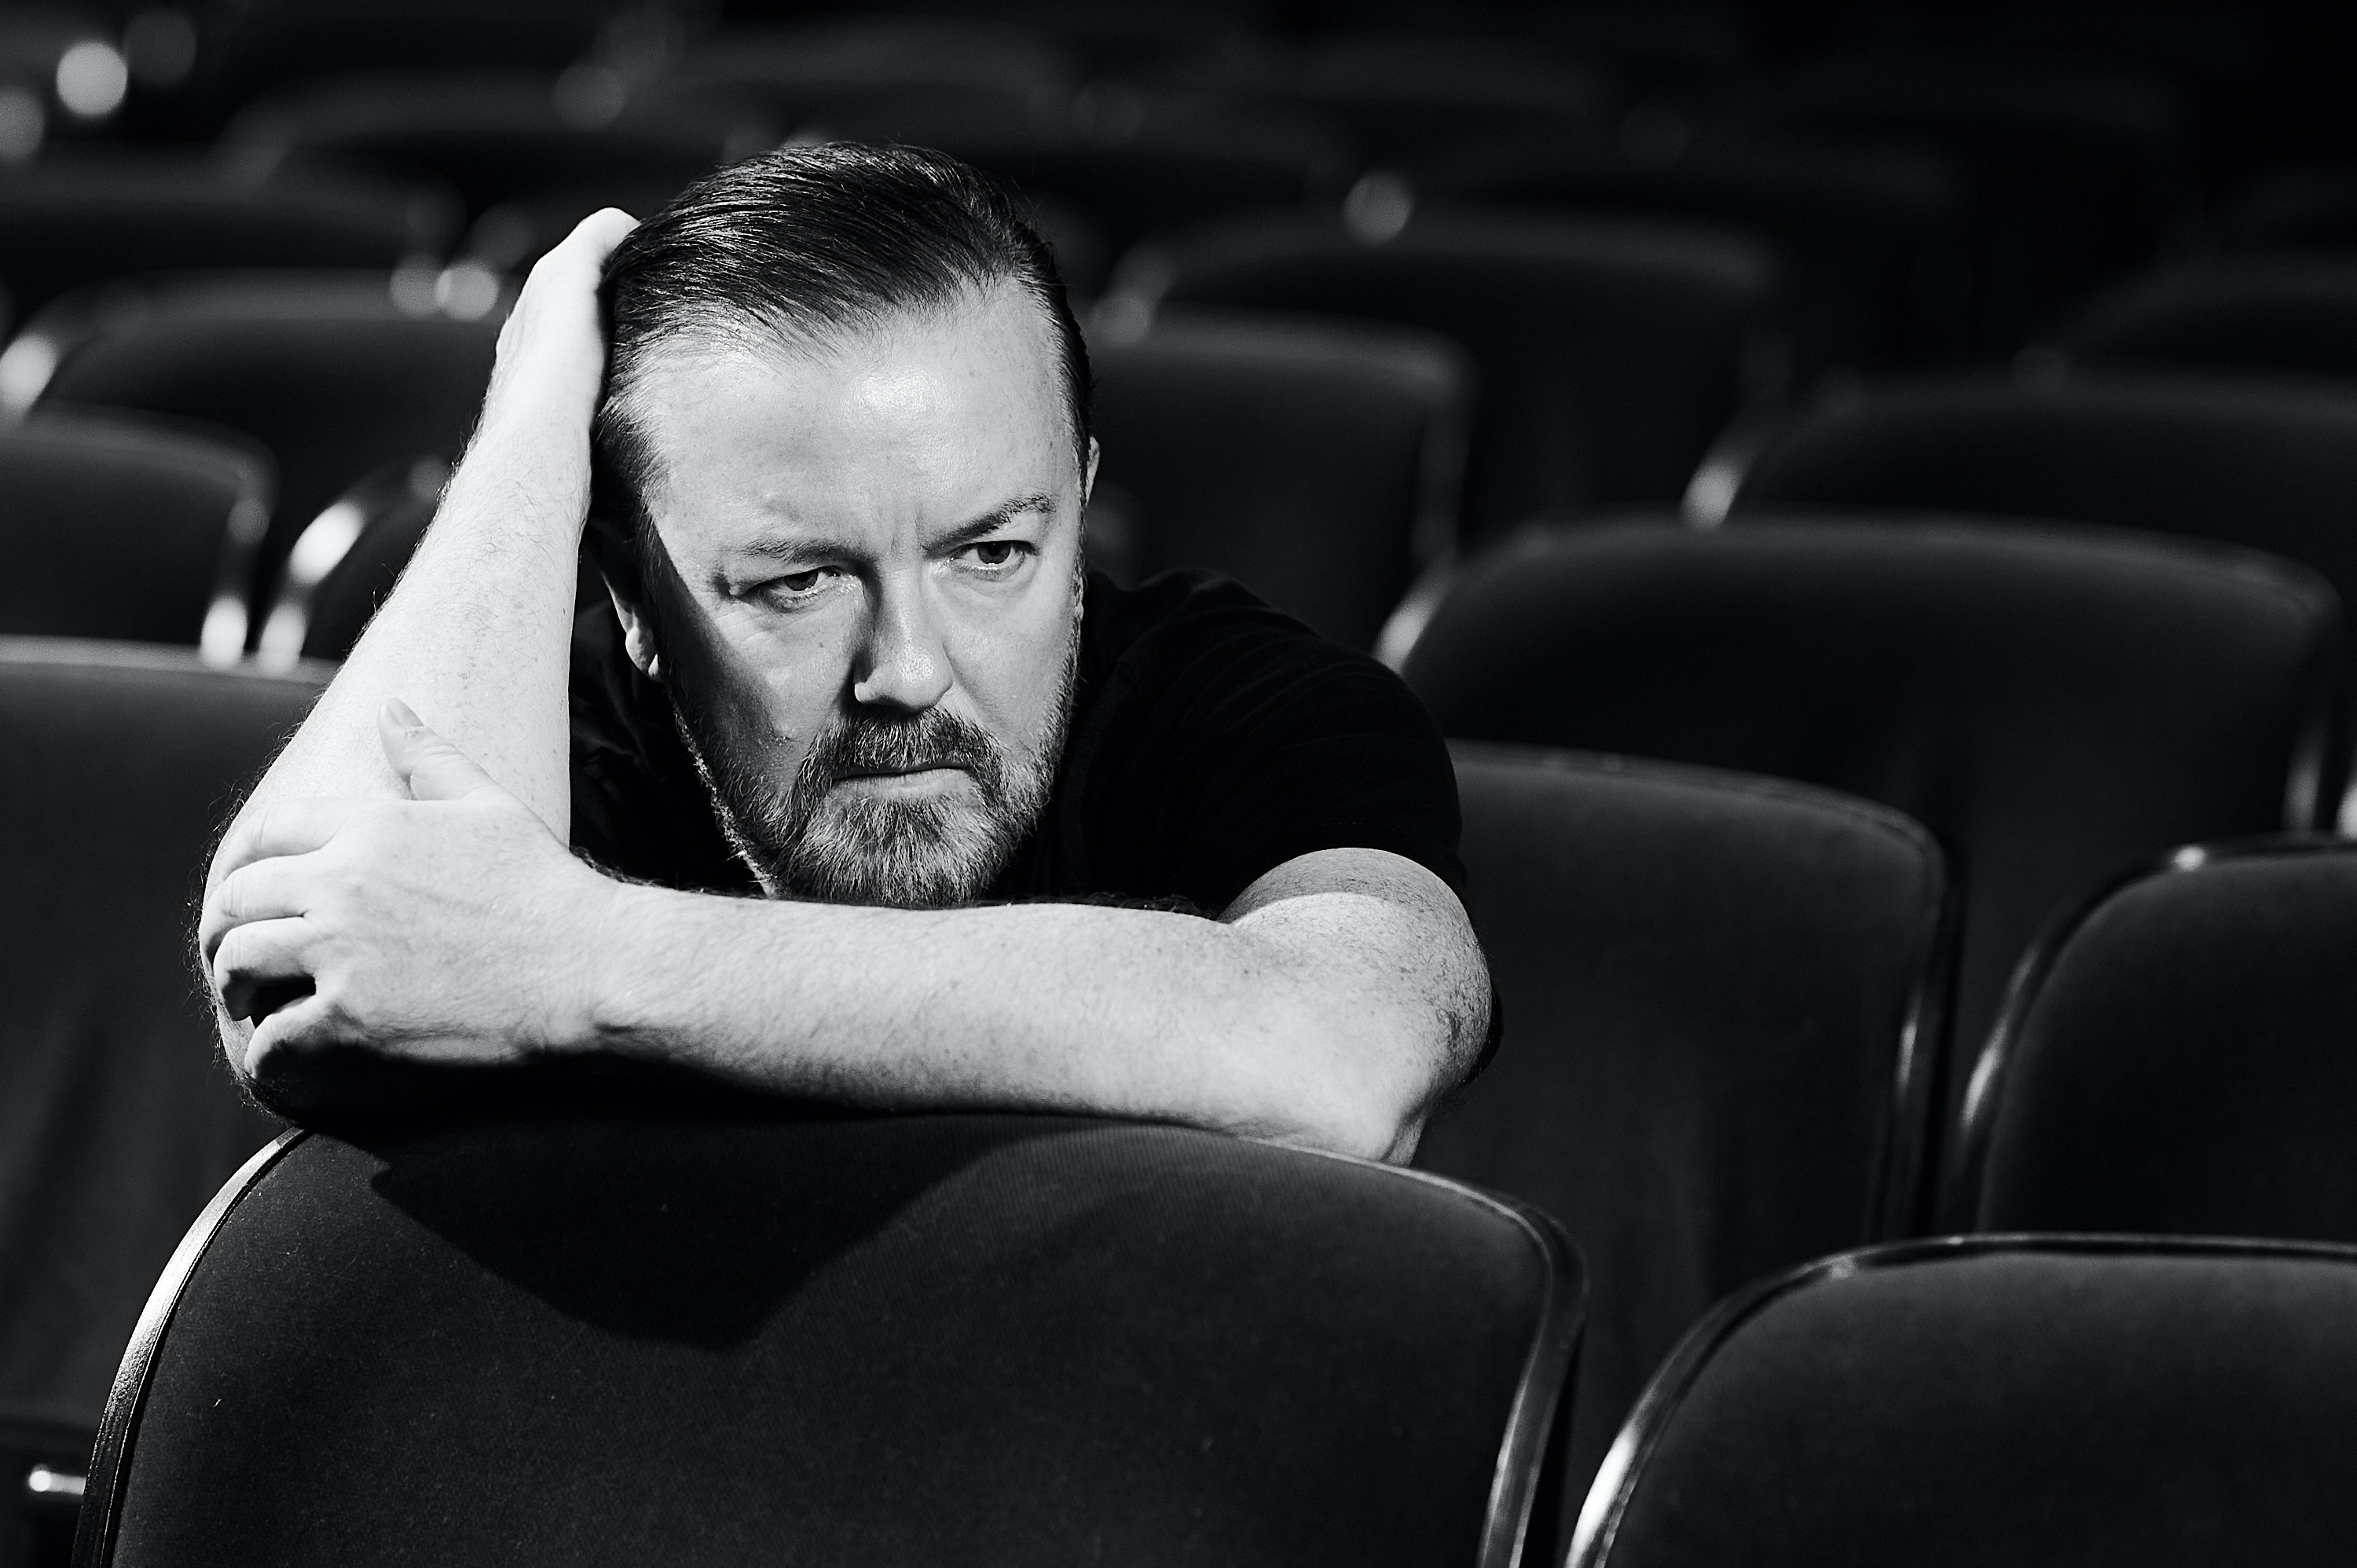 Ricky Gervais has voiced his opinion on the matter. Credit: @rickygervais / Twitter